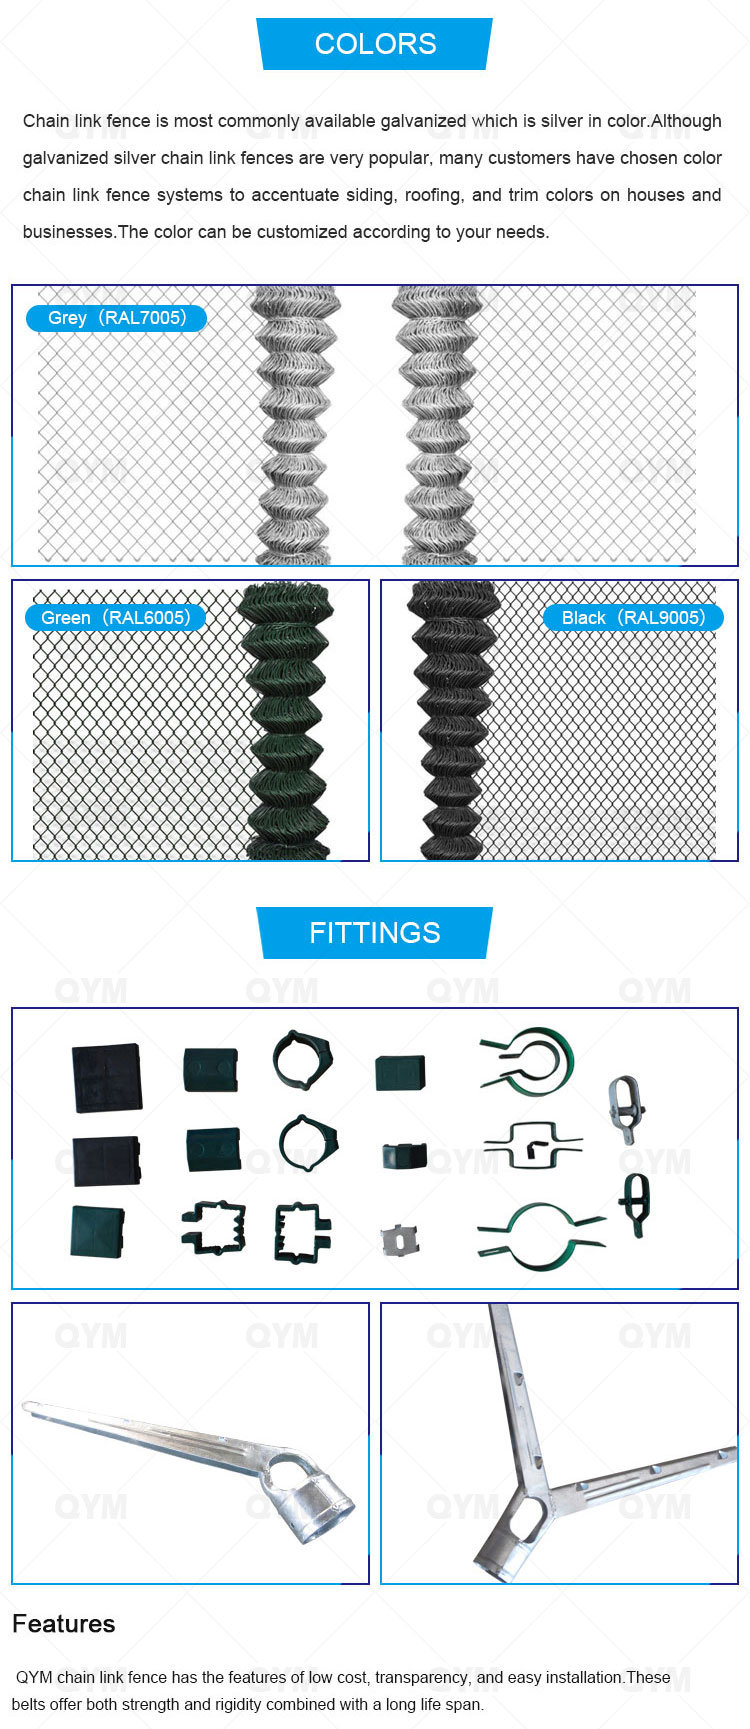 Hot Dipped Galvanized Cyclone Mesh Fence Chain Link Fence